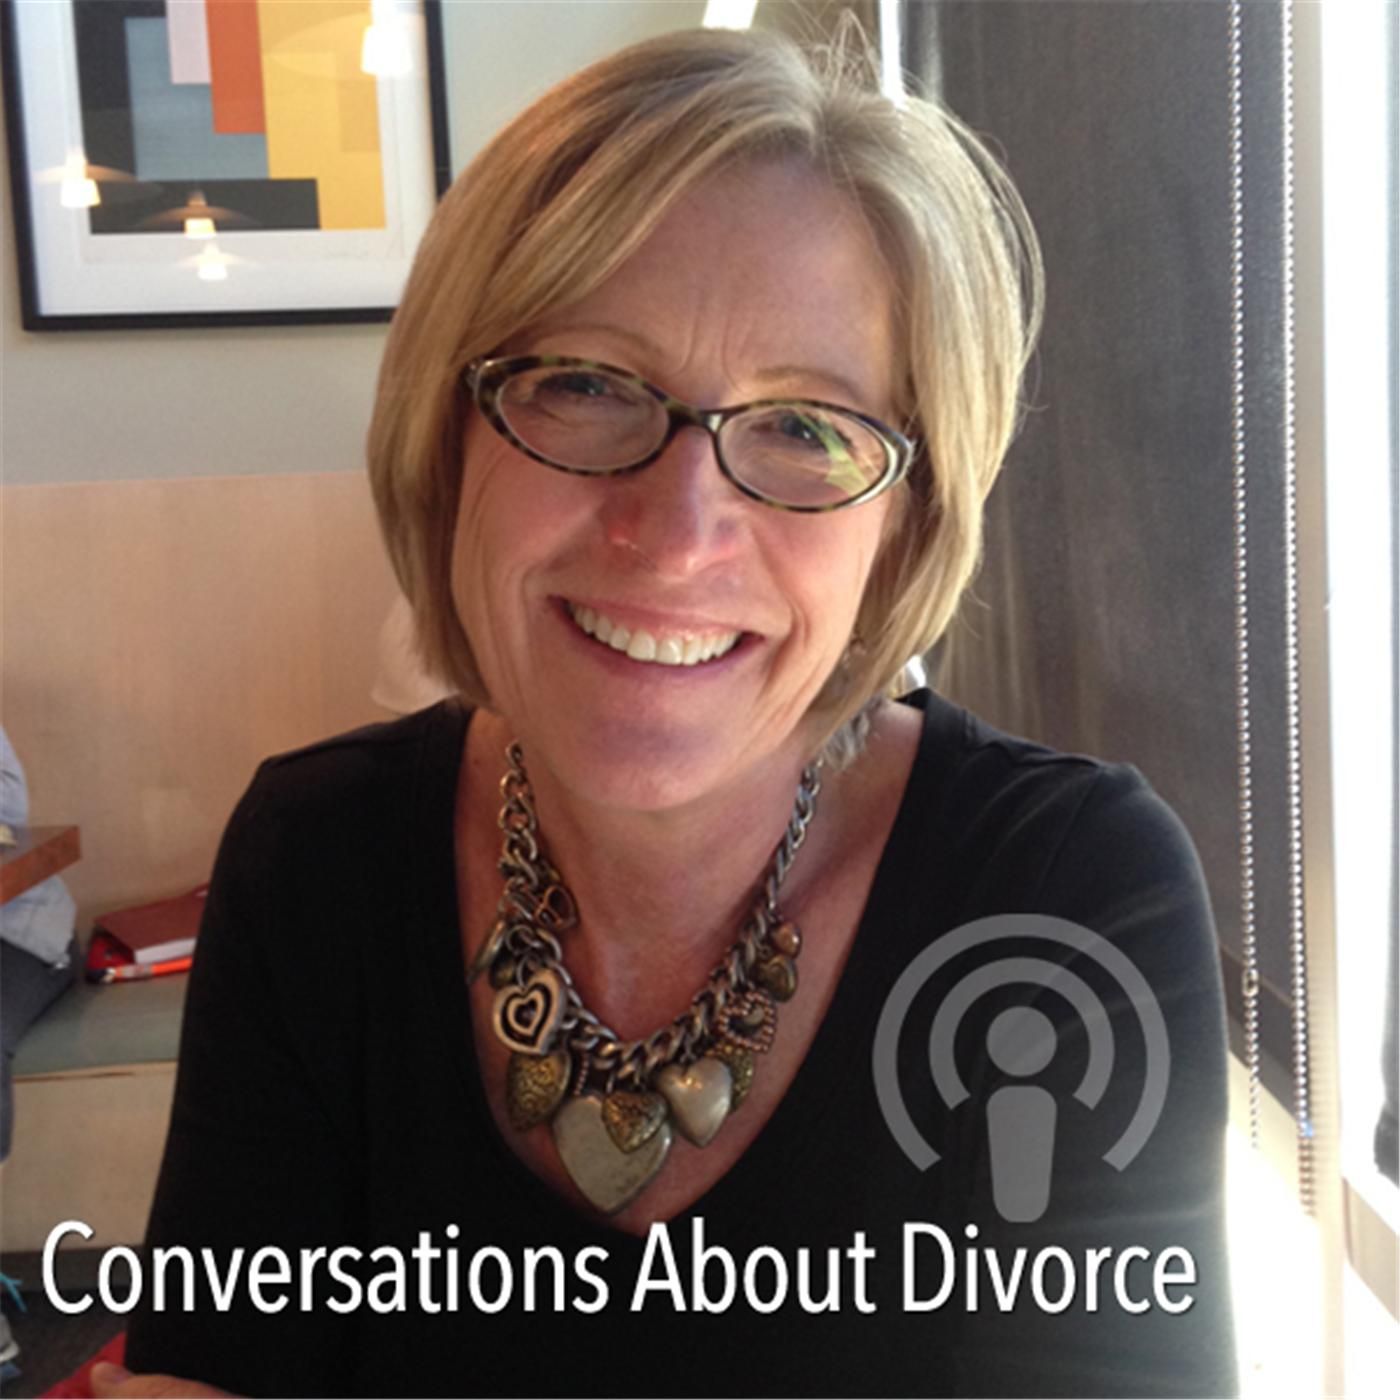 Conversations About Divorce - The Problem With Father’s Day And Divorce